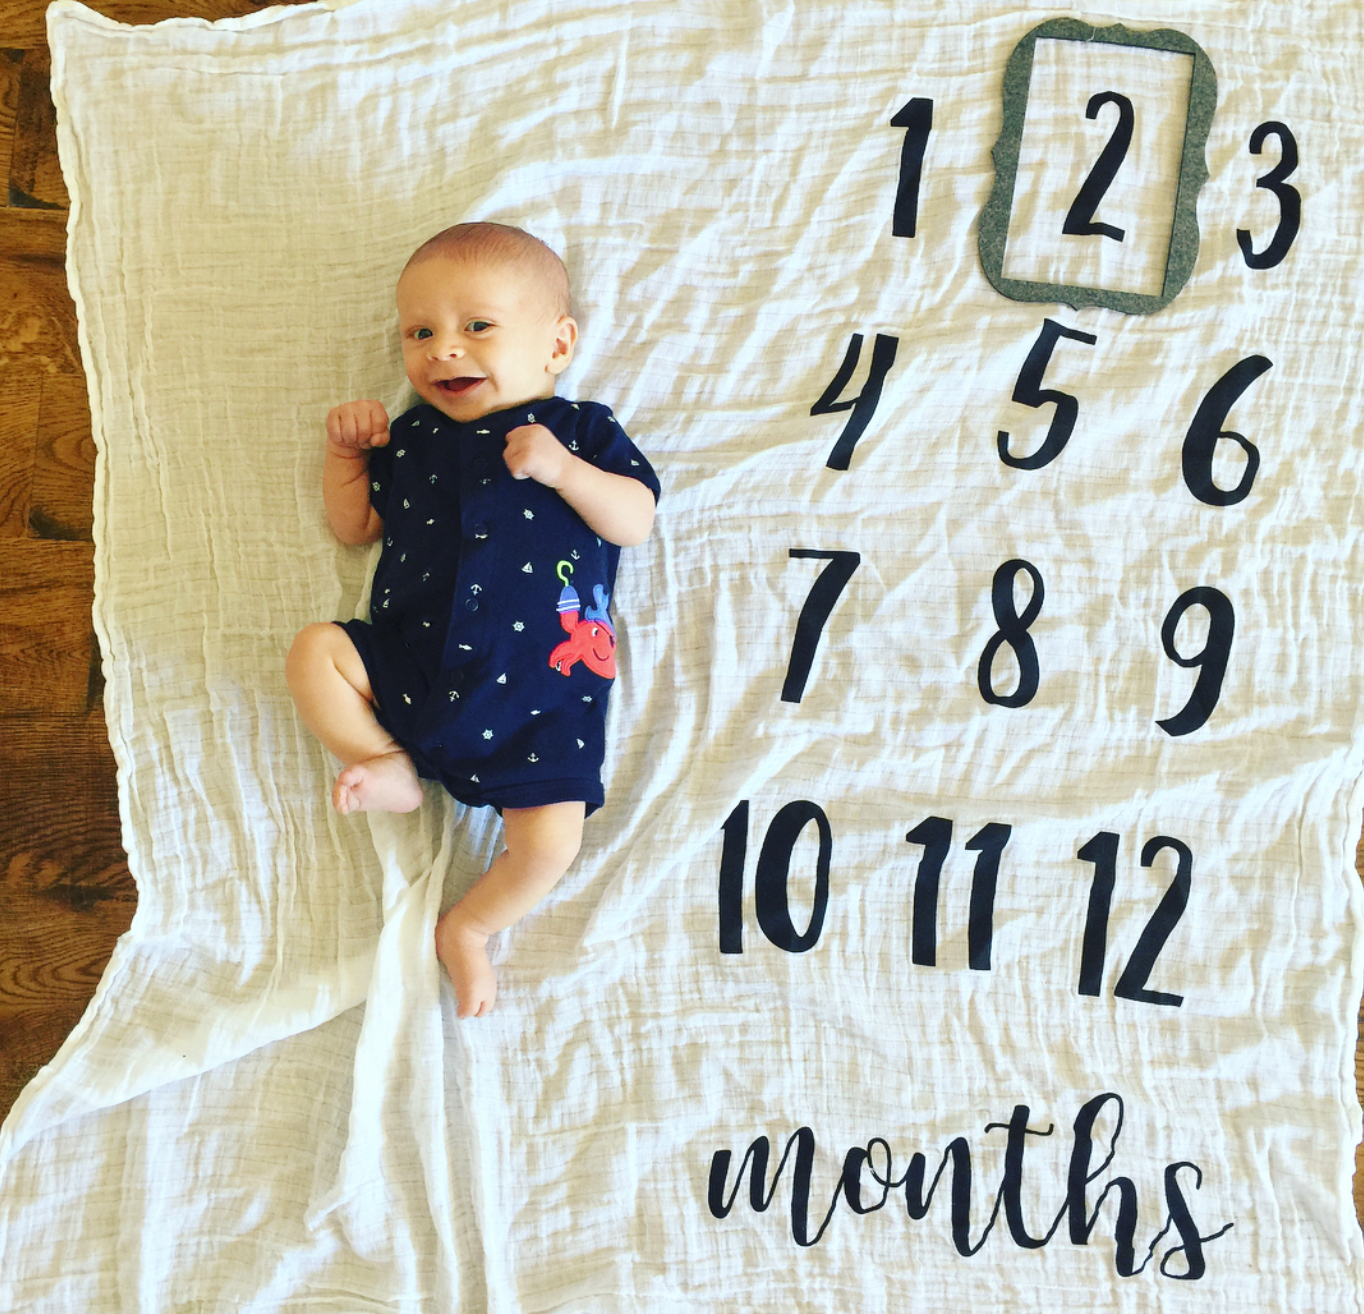 4 months old